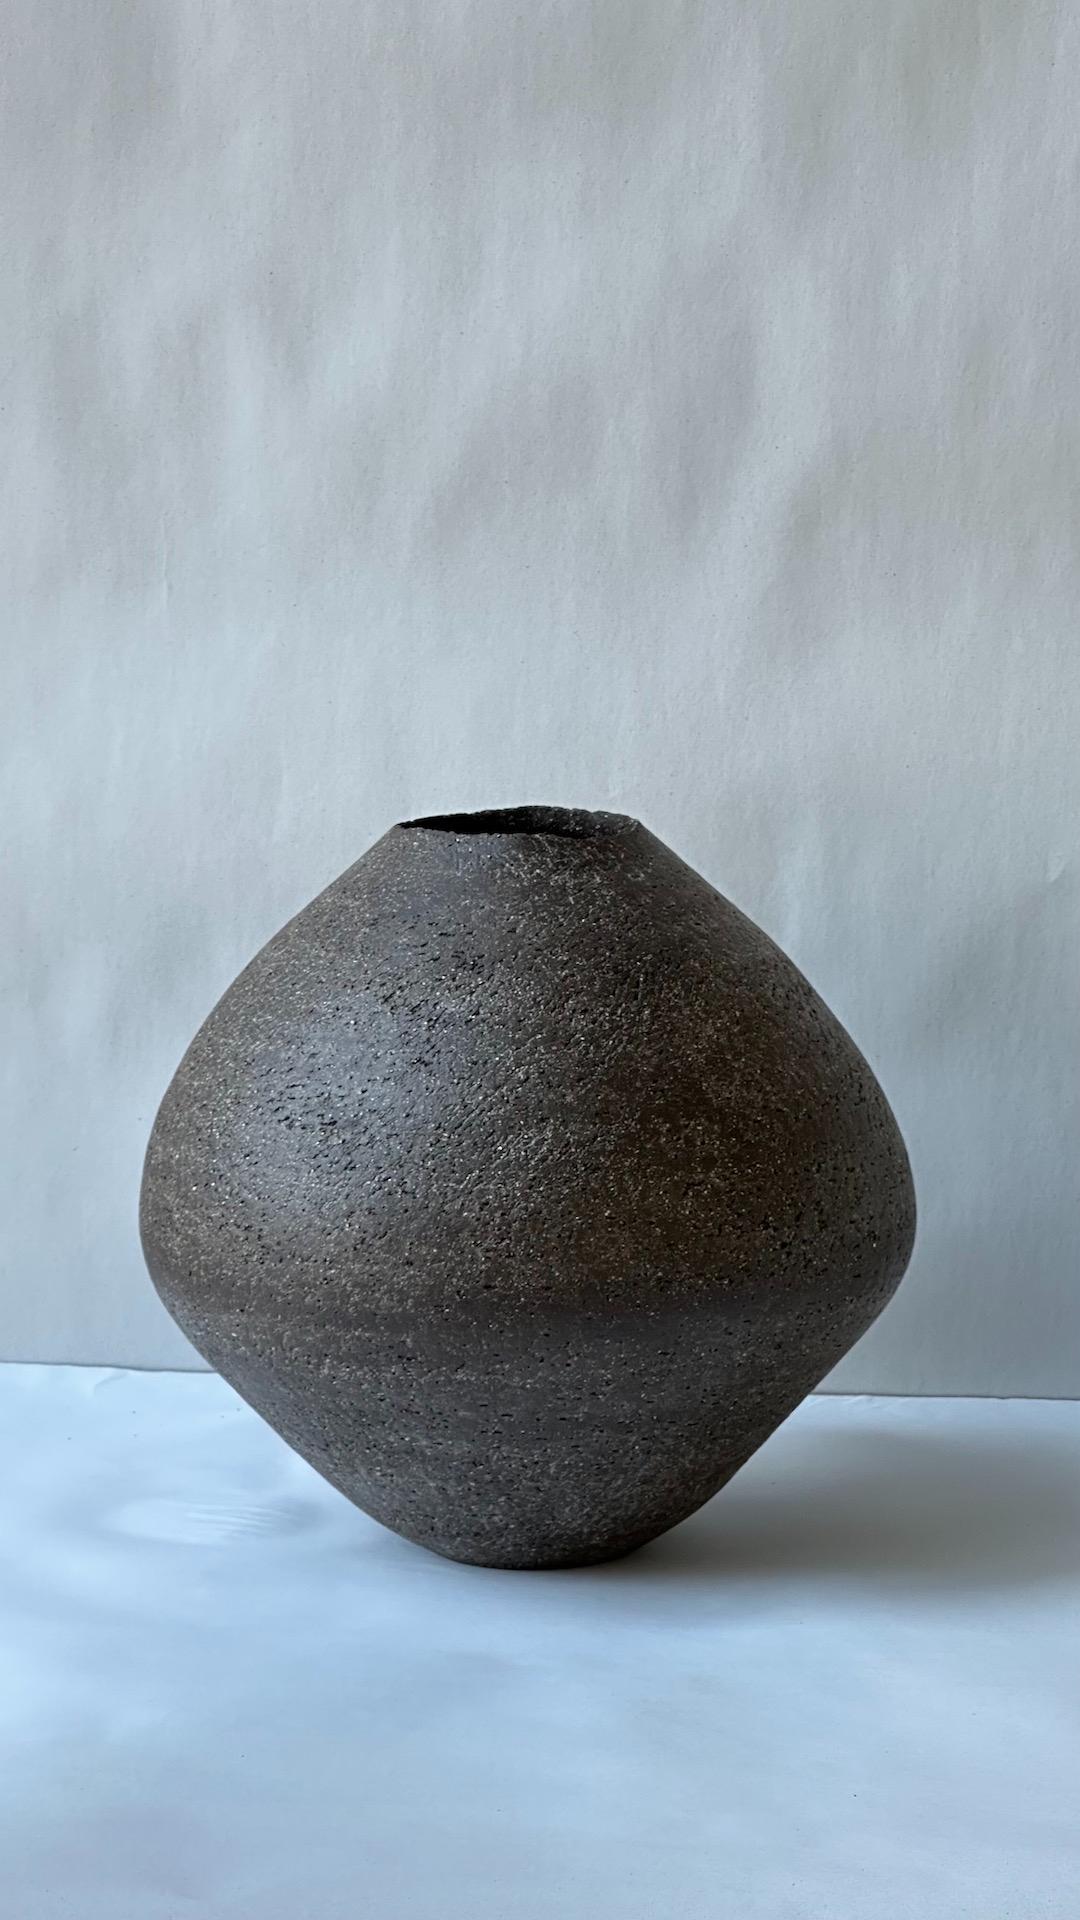 Black Stoneware Sfondyli Vase by Elena Vasilantonaki
Unique
Dimensions: ⌀ 27 x H 23 cm (Dimensions may vary)
Materials: Stoneware
Available finishes: Black, White, Brown, Red, White Patina

Growing up in Greece I was surrounded by pottery forms that